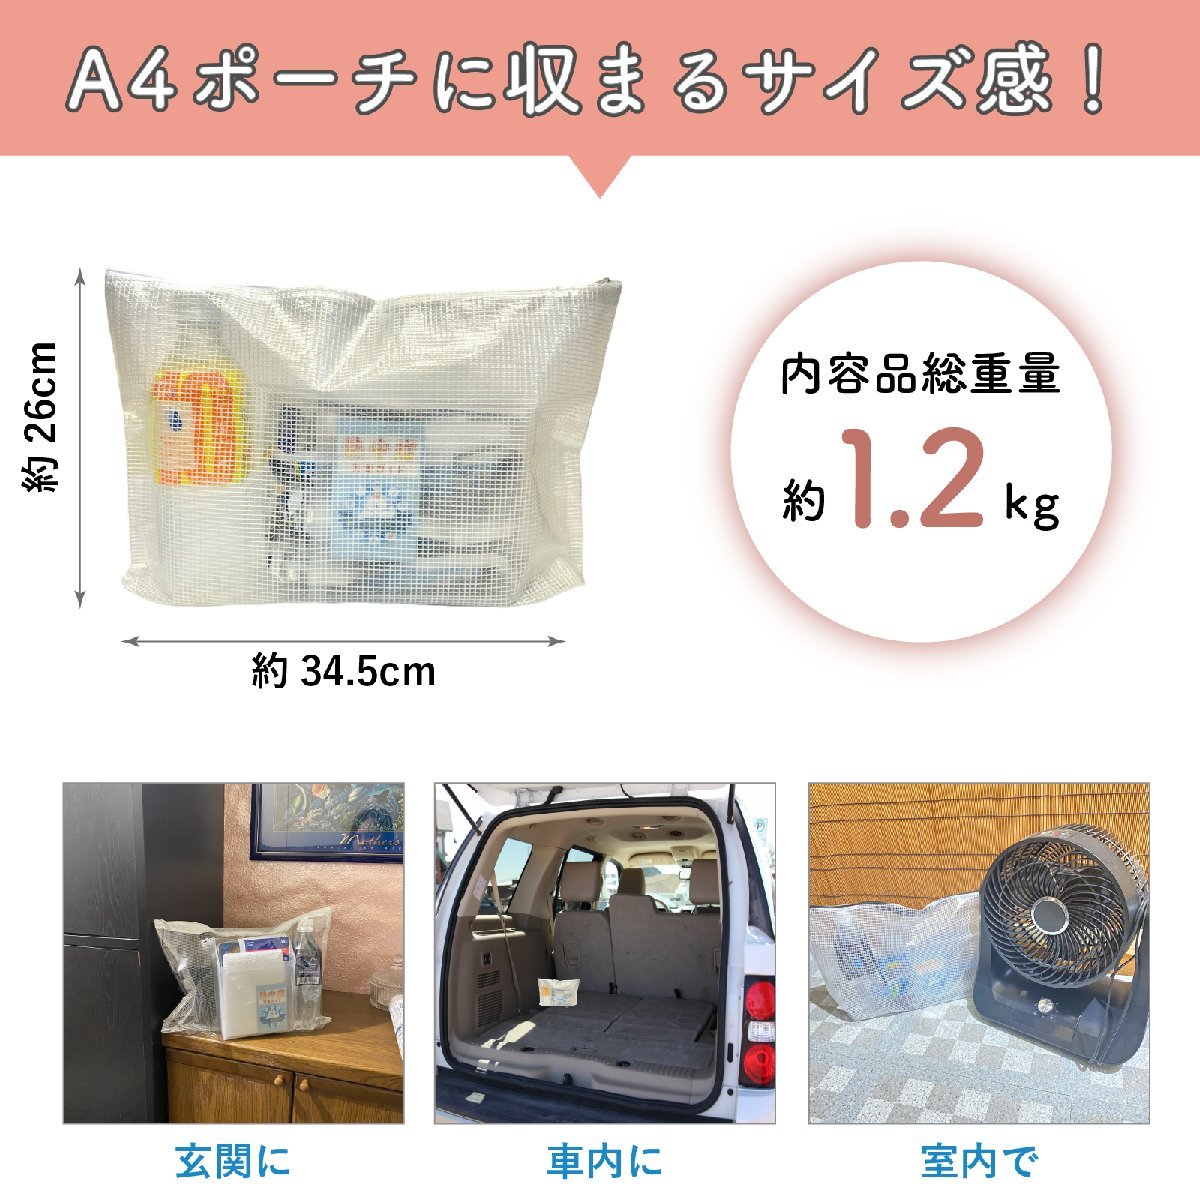 . middle . measures gtsu. middle . prevention slim set [ disaster prevention ...] site construction industry construction site 2023. middle . measures kit oral . water powder 